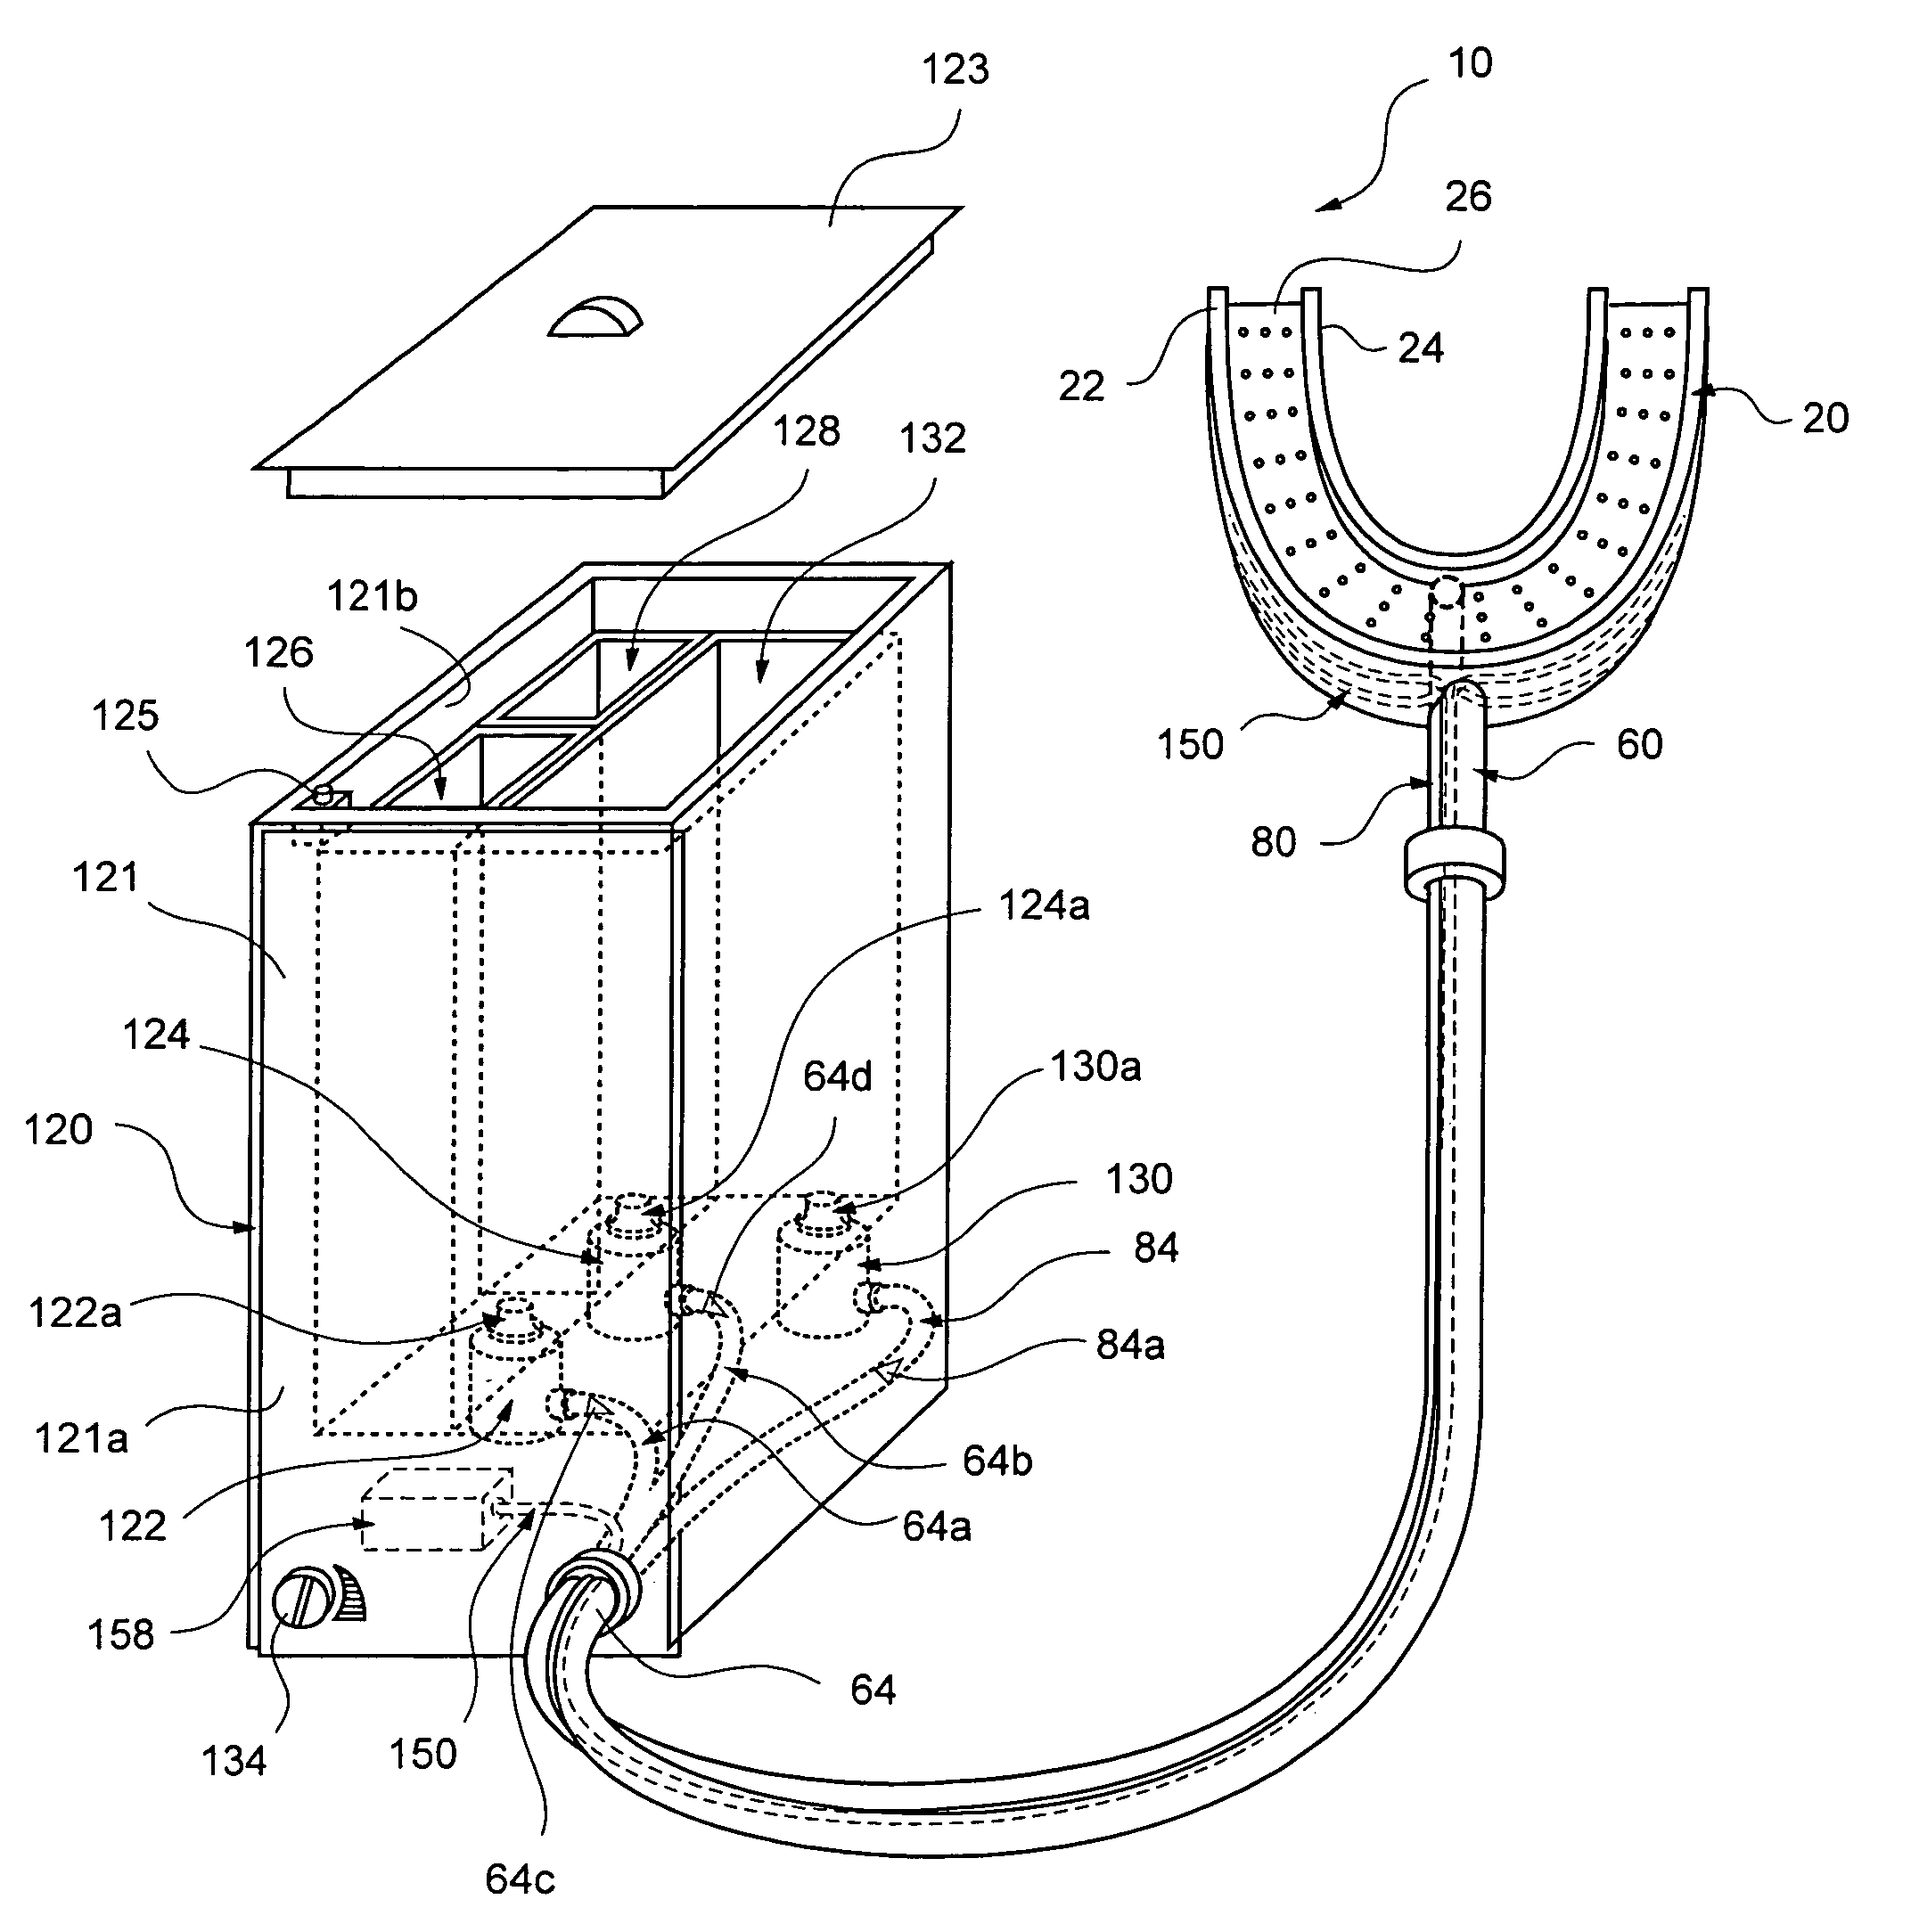 Oral hygiene device and method of use therefor